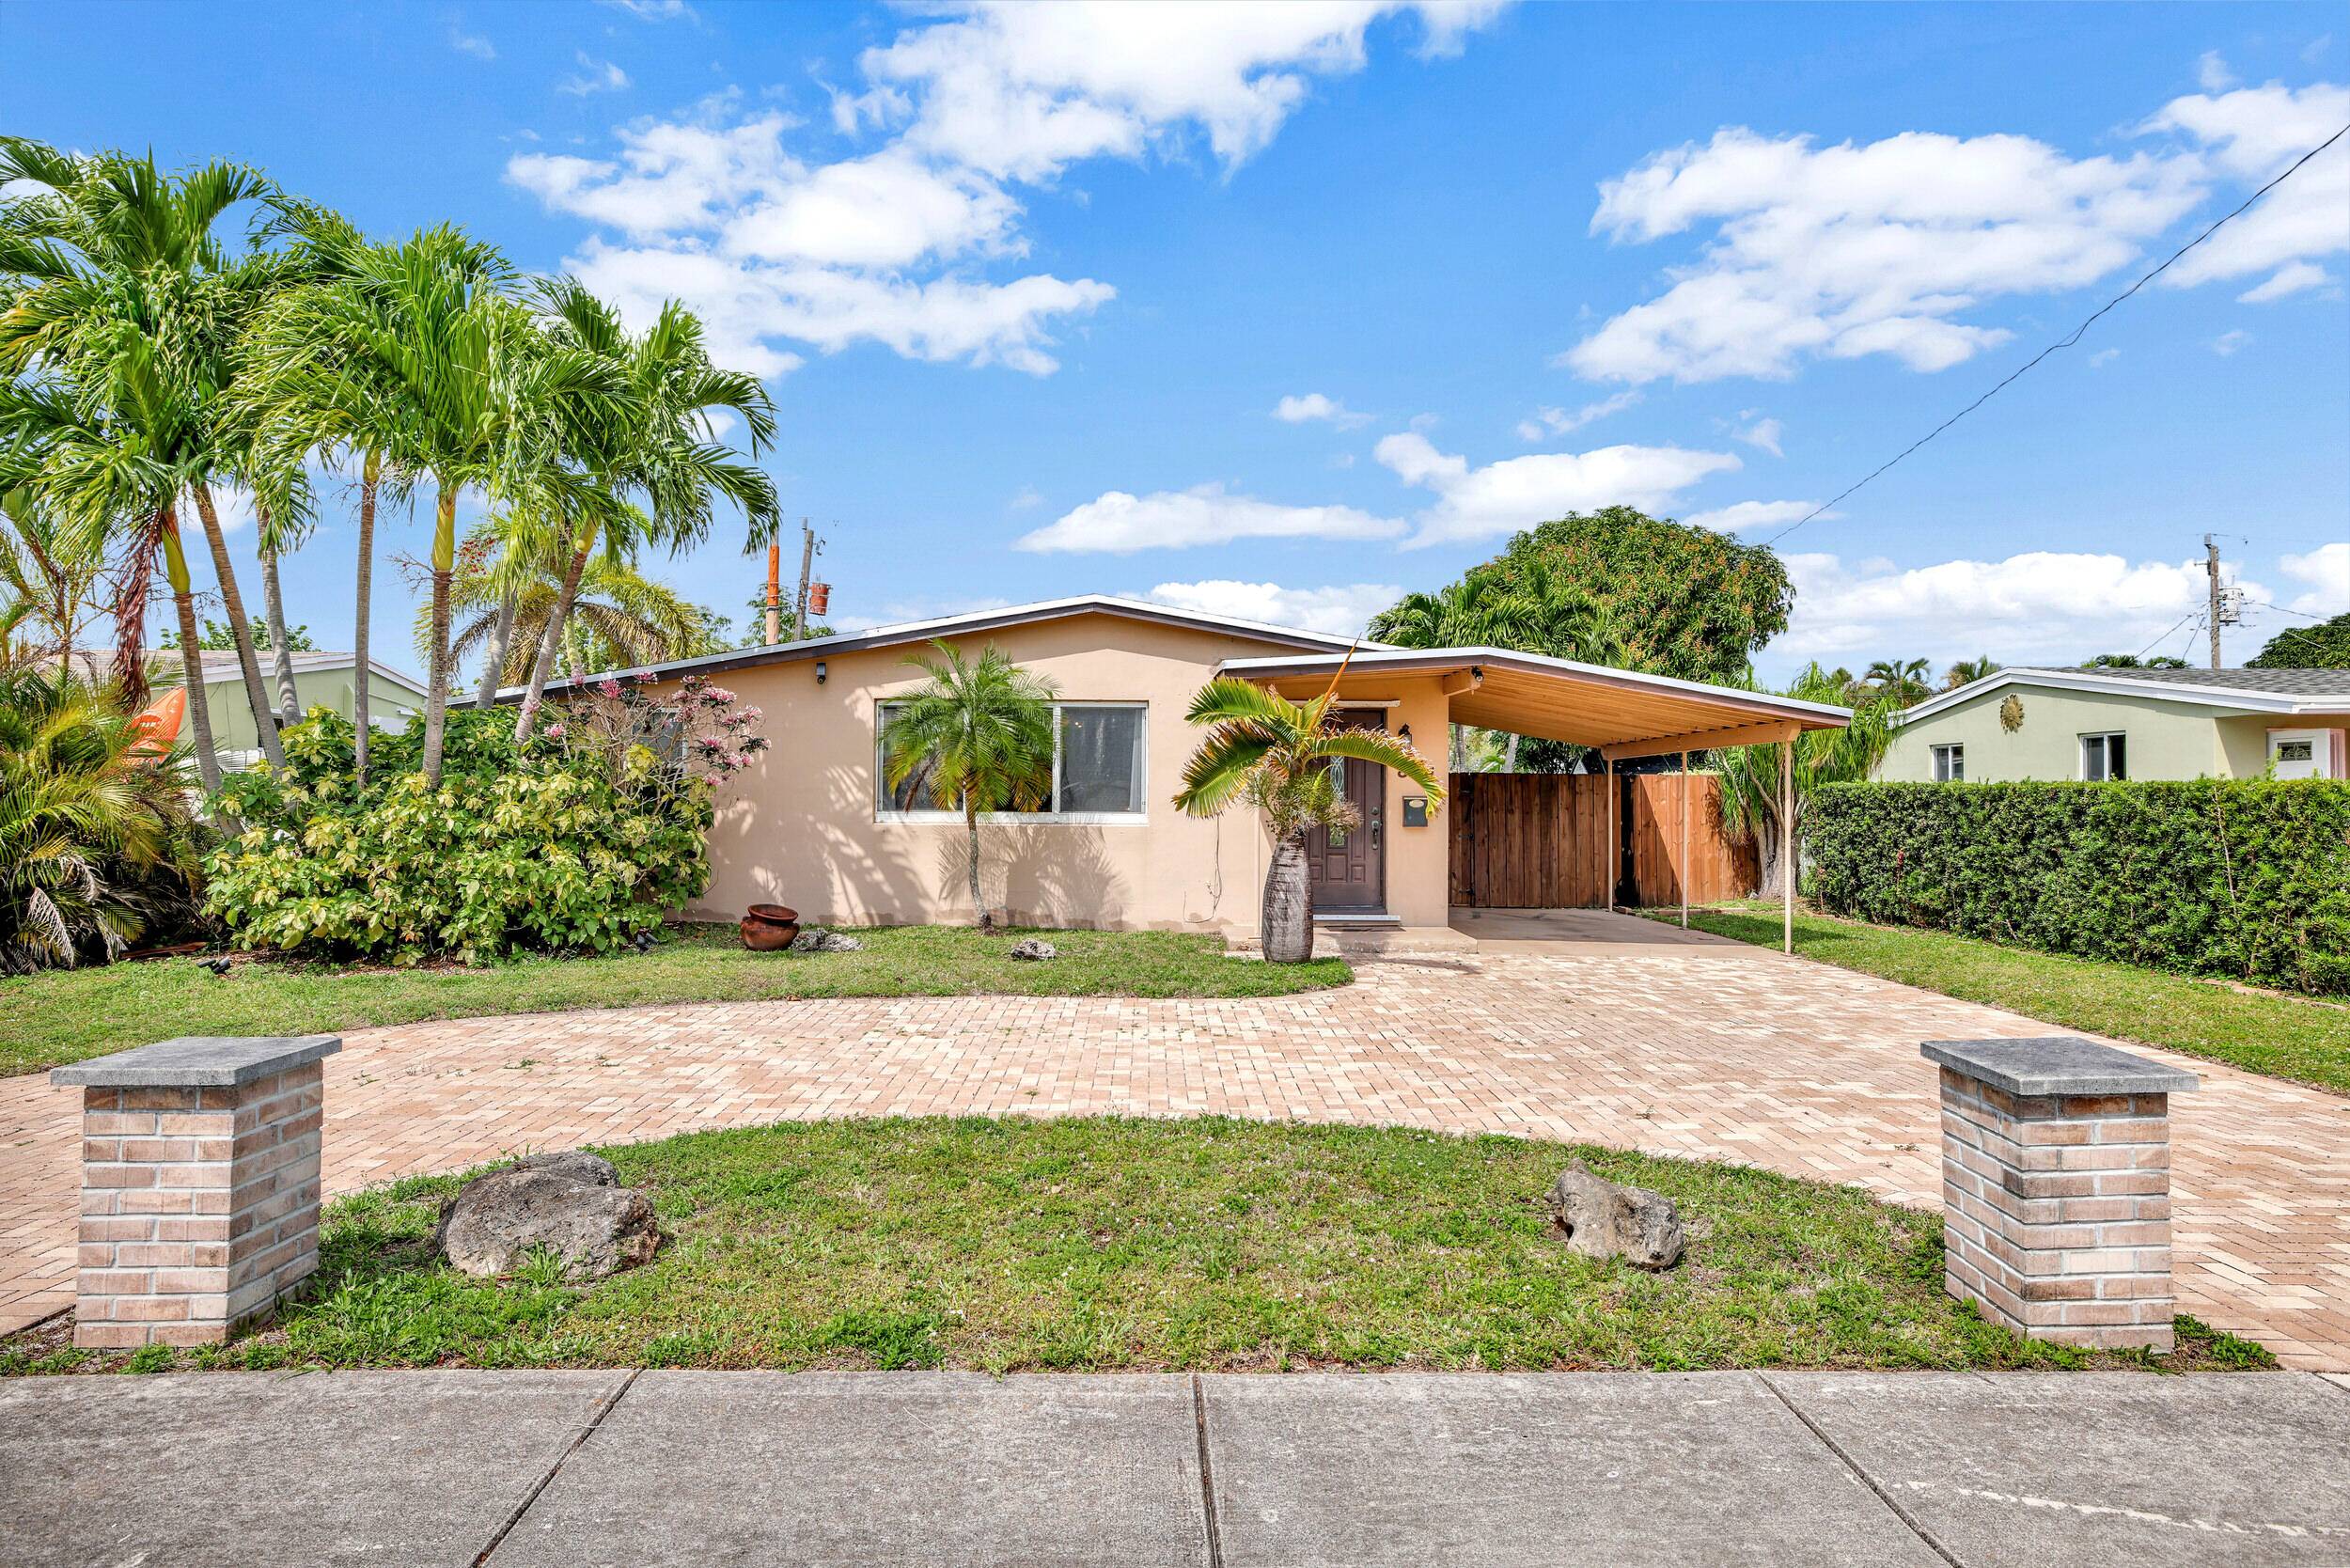 New Price ! Updated 3 bedroom, 1 bath home in the desirable Collier Estates neighborhood of Oakland Park, featuring updated kitchen with Silestone countertops, tiled backsplash, and stainless steel refrigerator ...